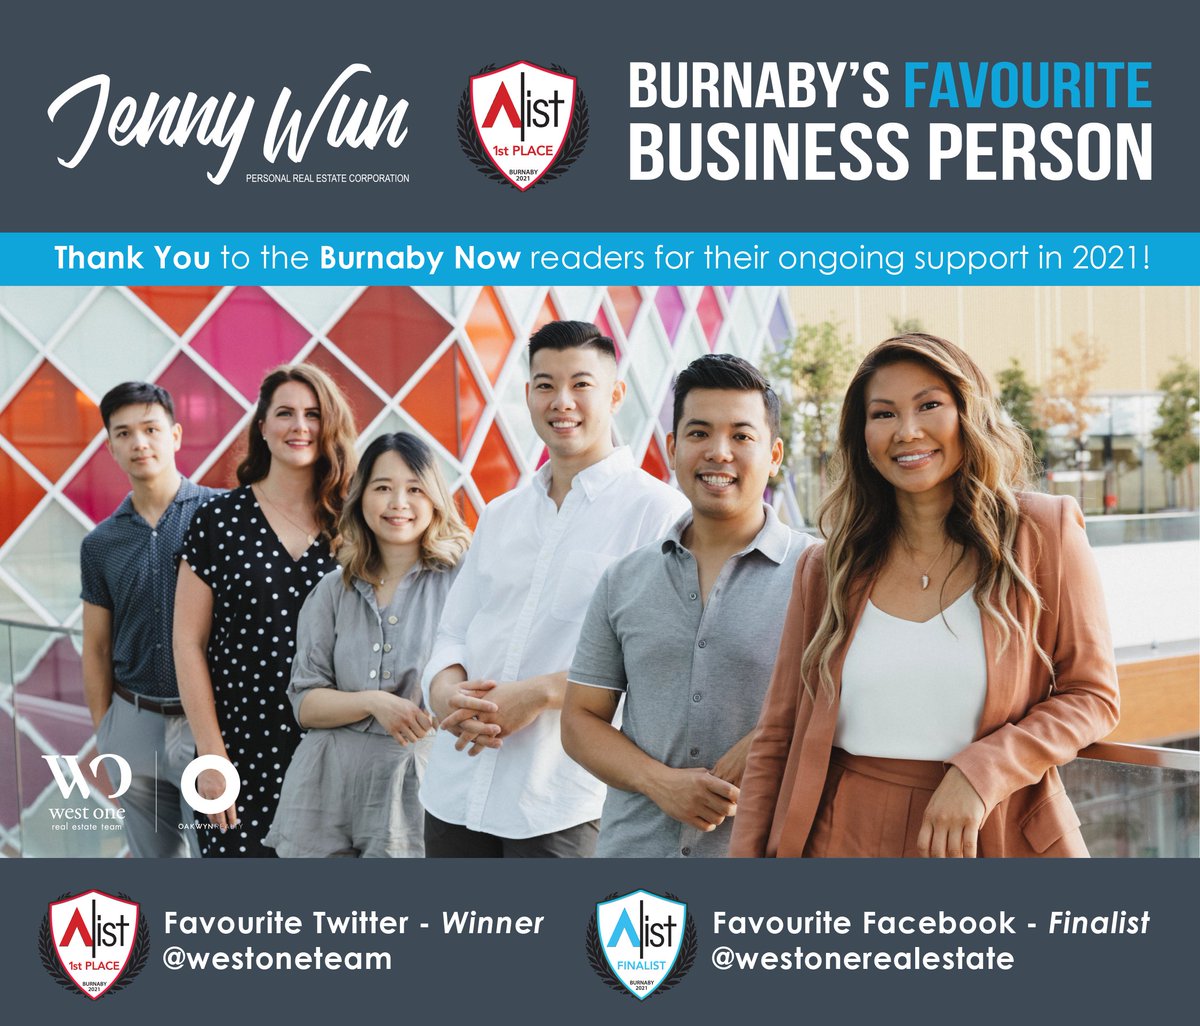 We are excited to announce for the 2nd year in a row Jenny Wun has been named Burnaby's FAVOURITE LOCAL BUSINESS PERSON in the A-LIST 2021 Awards by the readers of @BurnabyNOW_News! Congratulations to all of the other 2021 winners!
https://t.co/N4saiXensH https://t.co/ToVWlMvOoJ